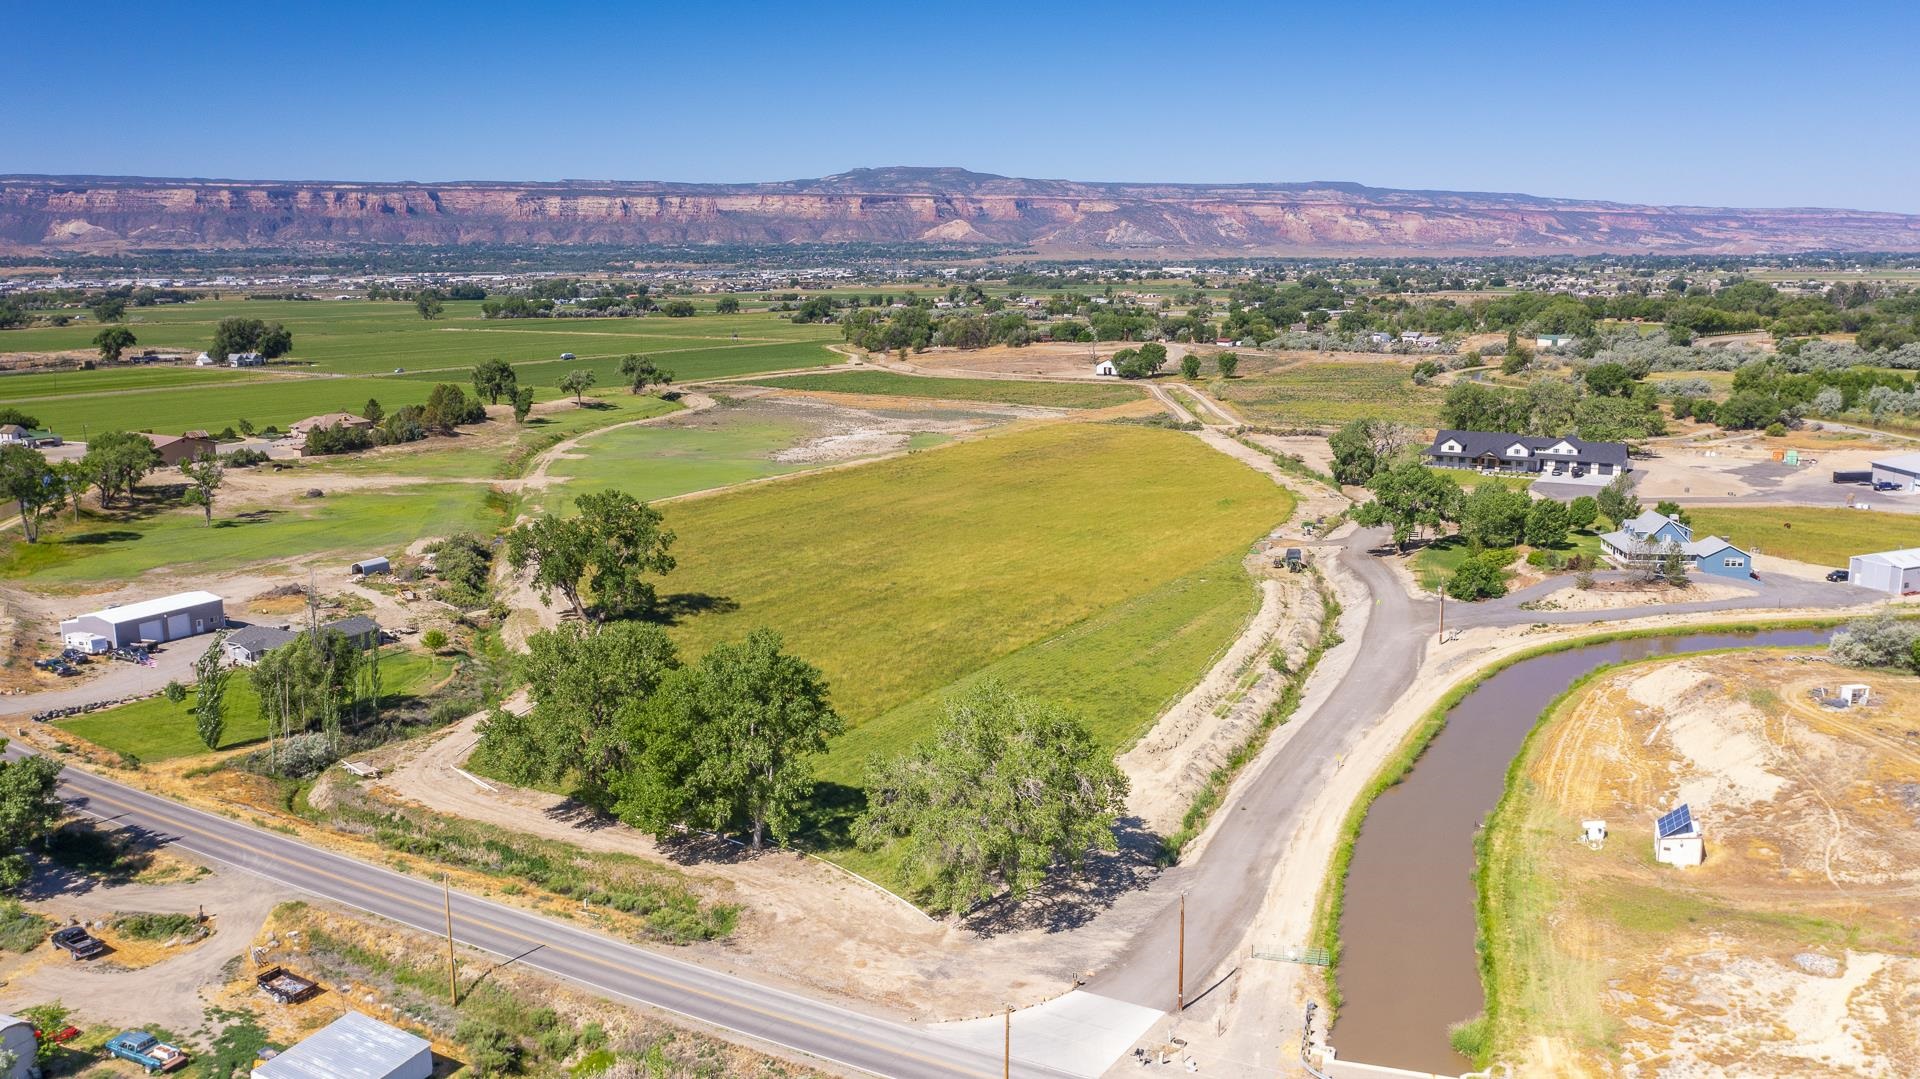 Opportunity awaits! This 7.06 acres is located in one of the most desirable locations in Grand Junction and boasts opportunity and options for growth on beautiful level ground currently in pasture! This parcel includes 5 shares of GVIC irrigated acres and is perfectly located just minutes from the city park, restaurants, healthcare facilities and more while still providing you with the peace and quiet comforts of country living. Bring your vision and make your dream a reality!